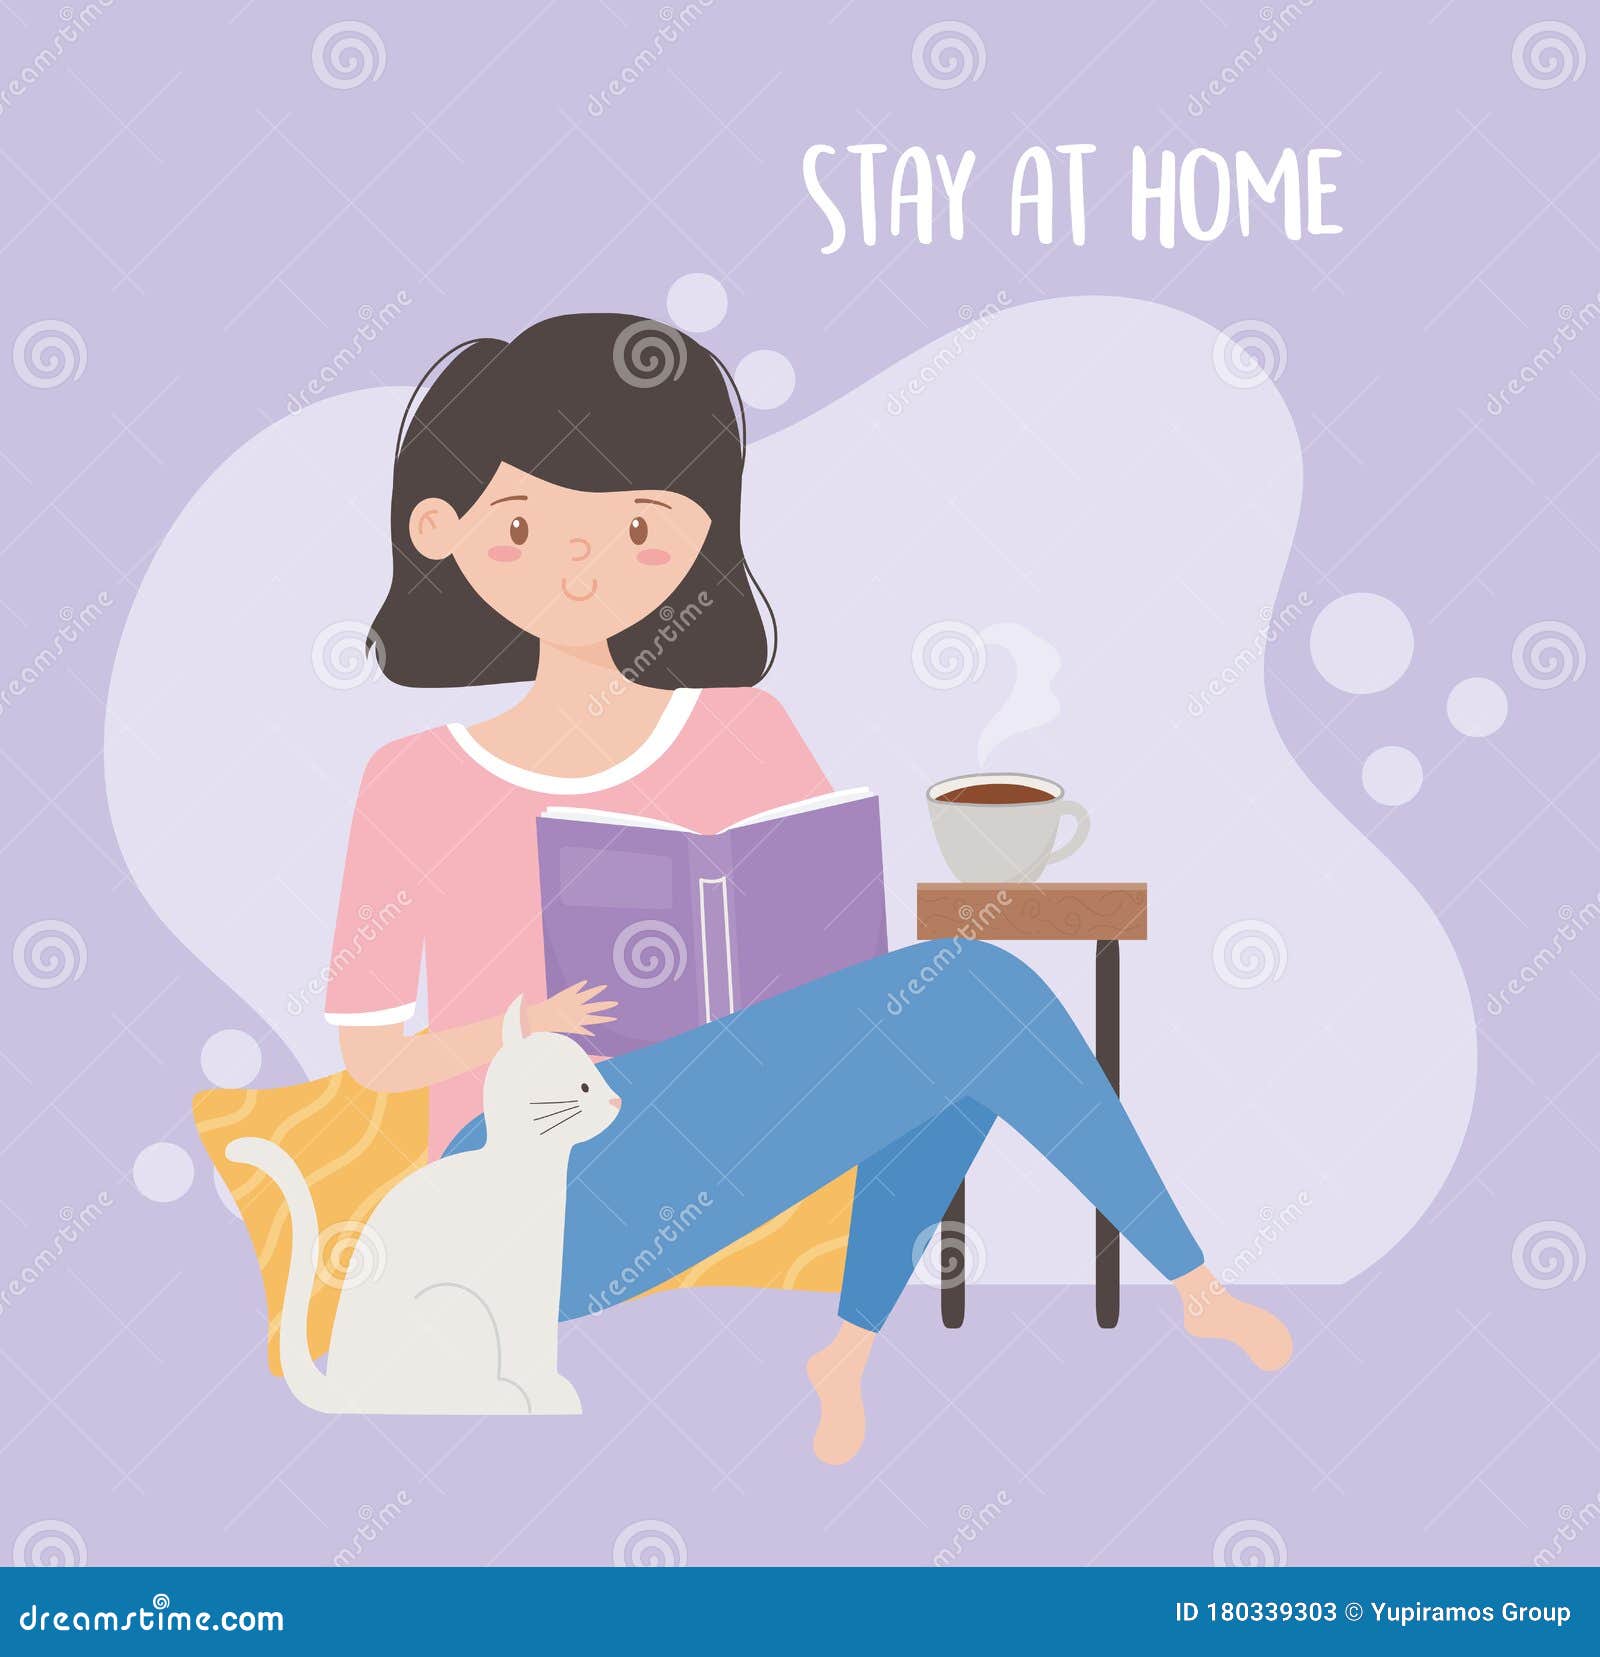 stay at home, young woman eading book and cat cartoon